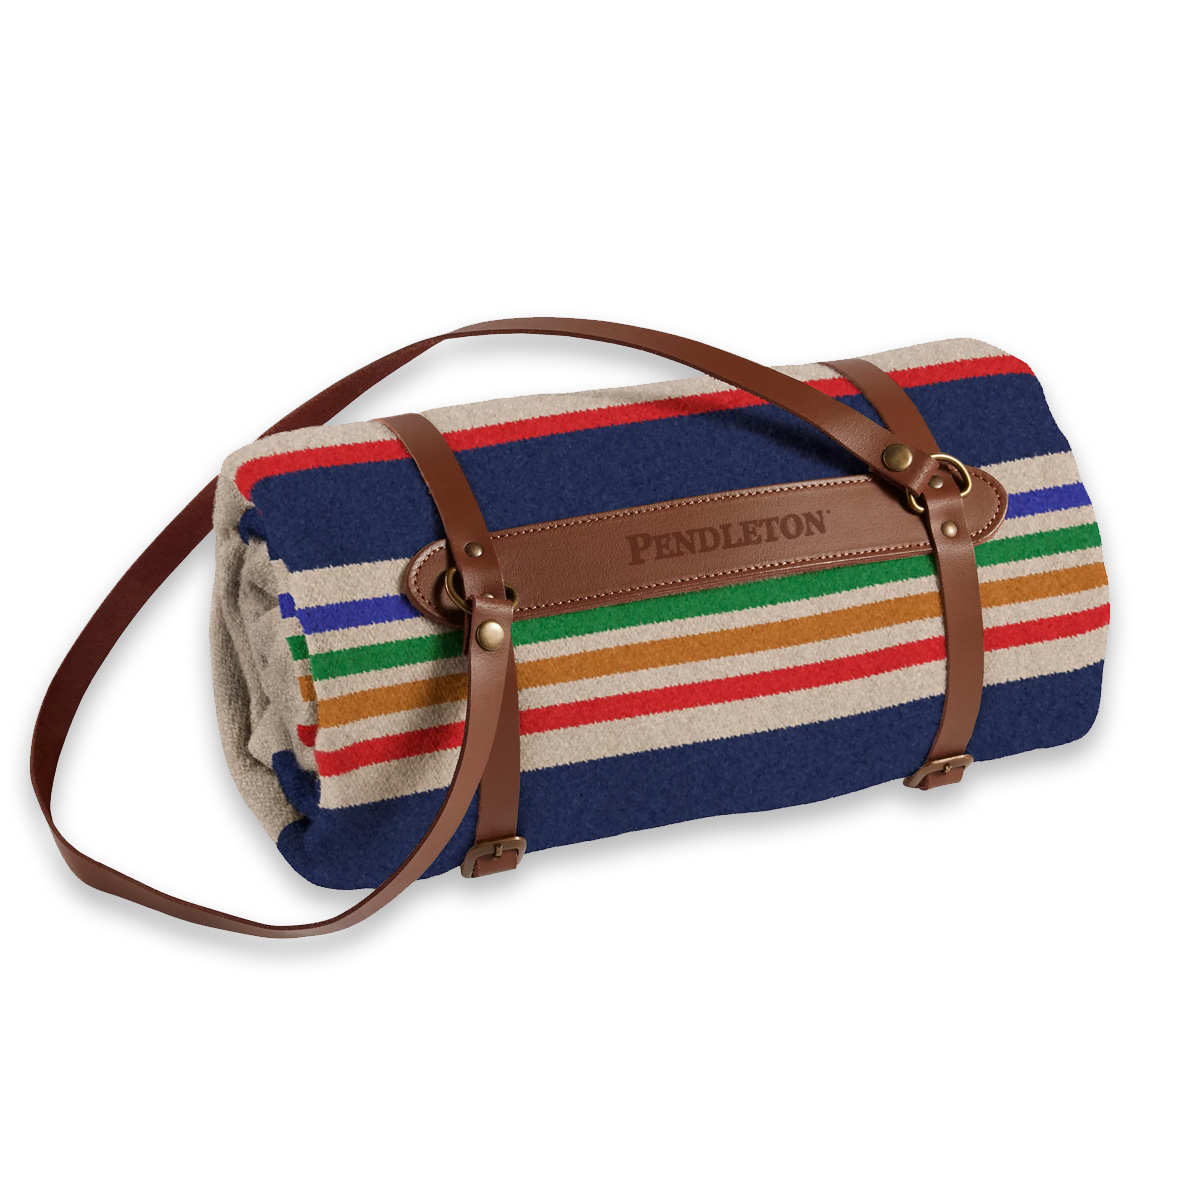 Pendleton National Park Throw With Carrier Yellowstone, Includes leather carrier for easy portability